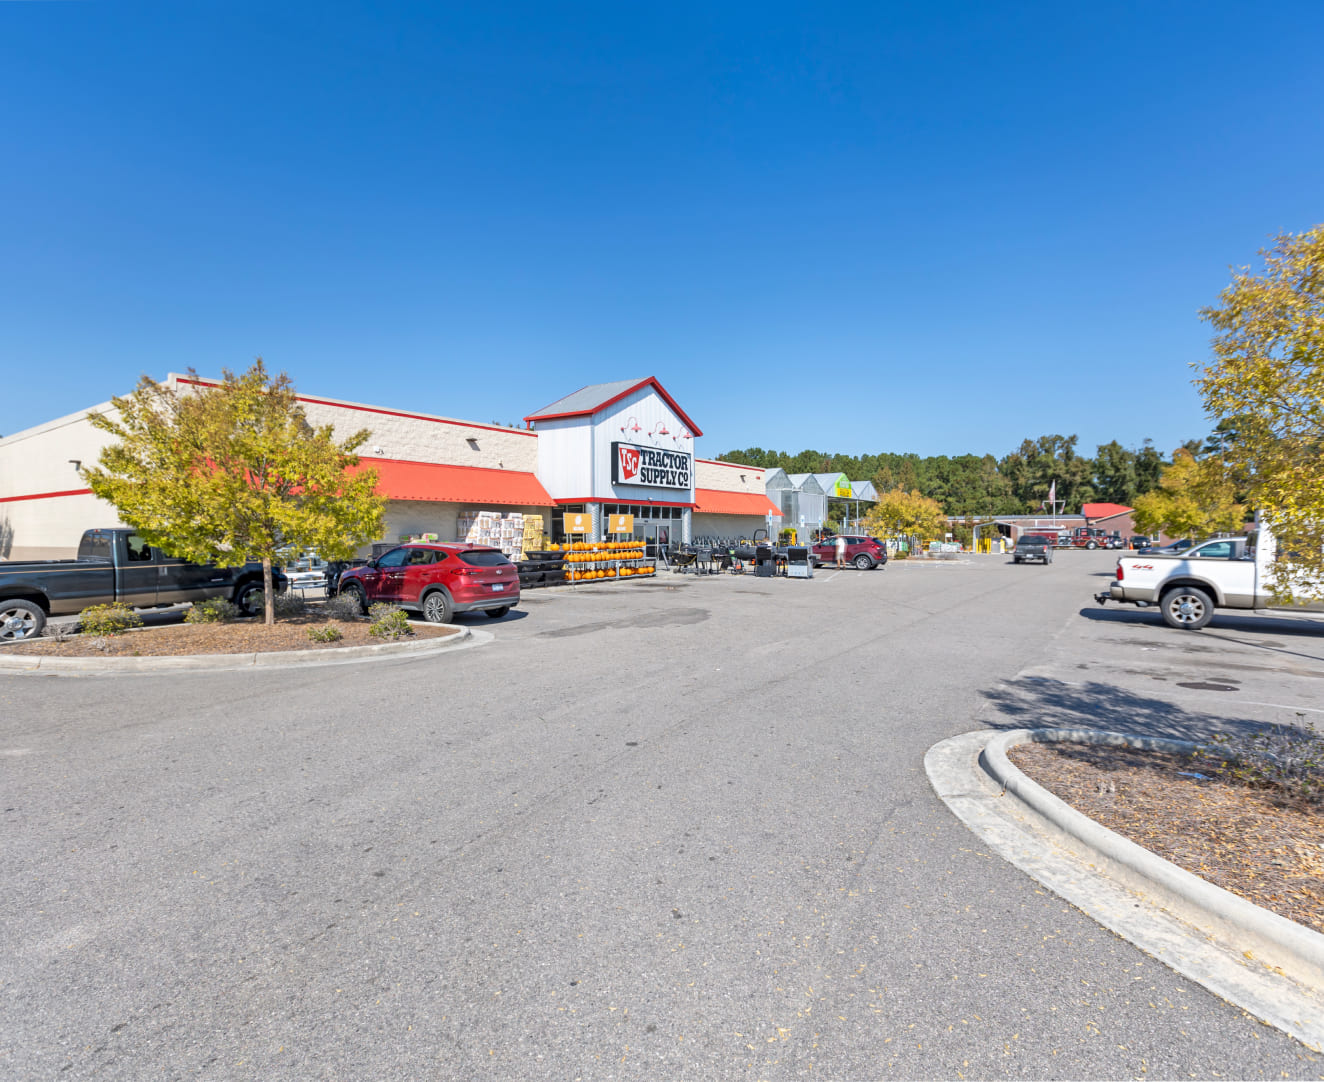 The left side of Tractor Supply Company at 7965 US Highway 117 in Rocky Point, NC. The parking lot is visable.